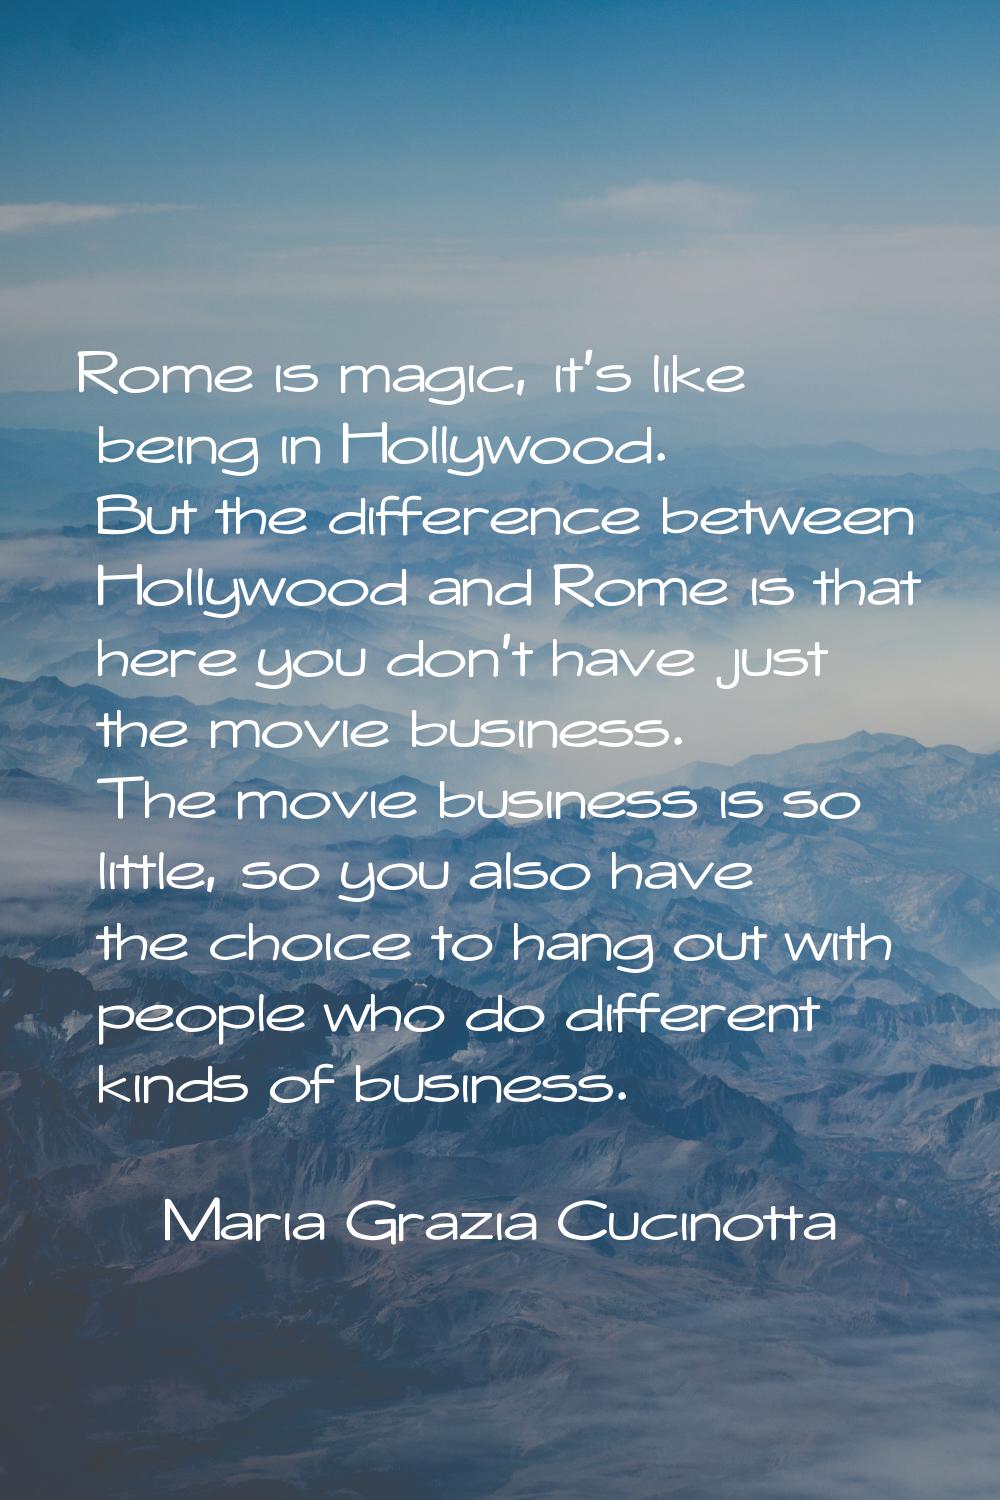 Rome is magic, it's like being in Hollywood. But the difference between Hollywood and Rome is that 